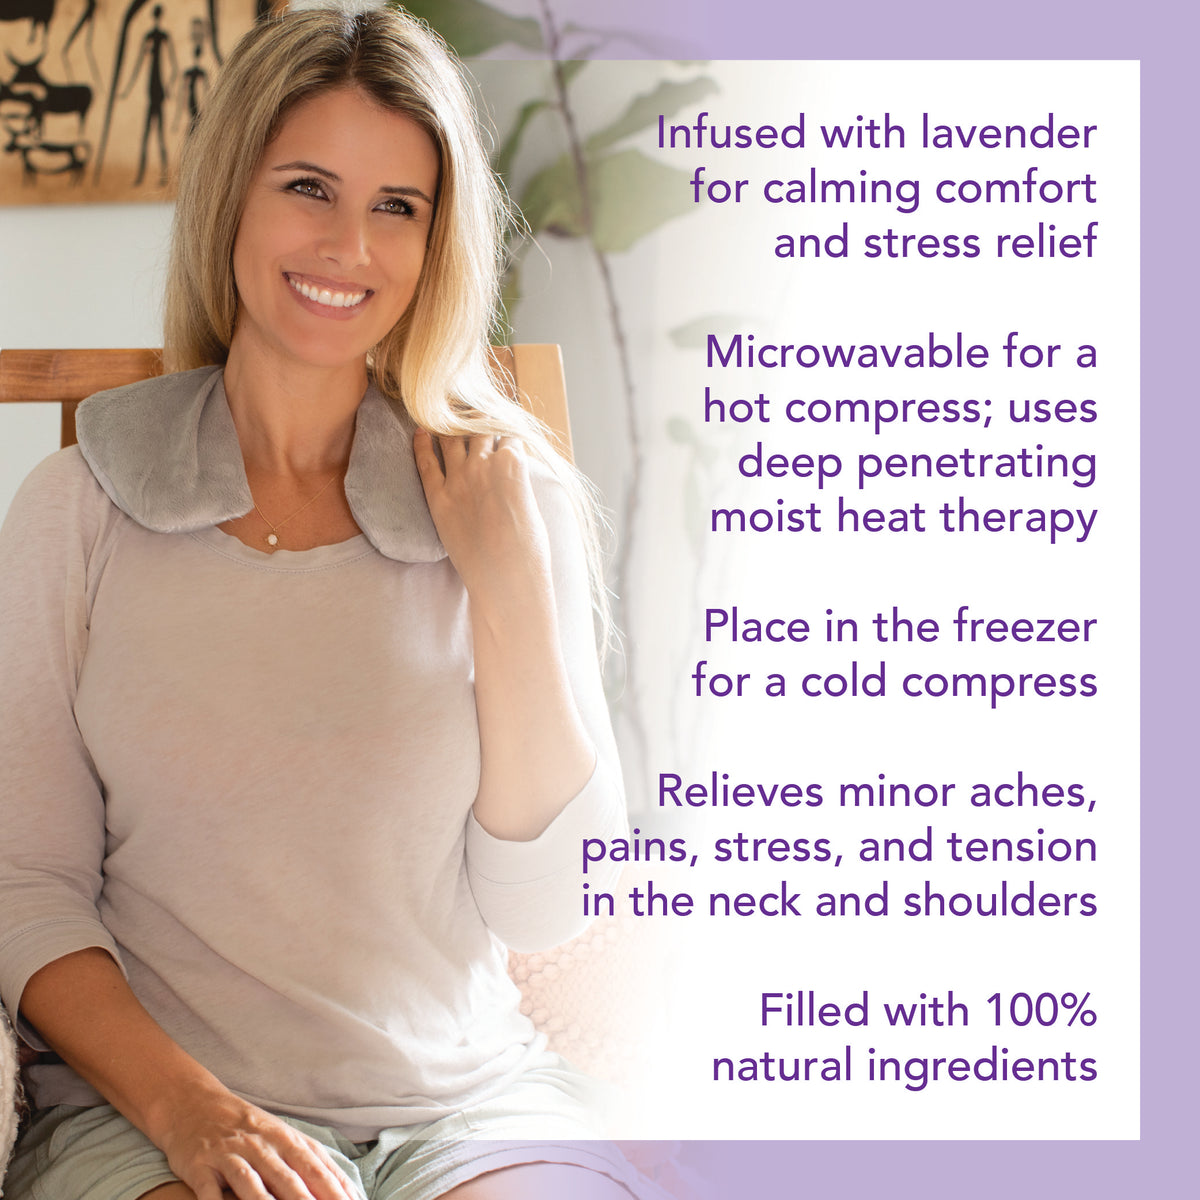 Image of woman with Carex Lavender Neck Wrap around her neck, further details are provided below.